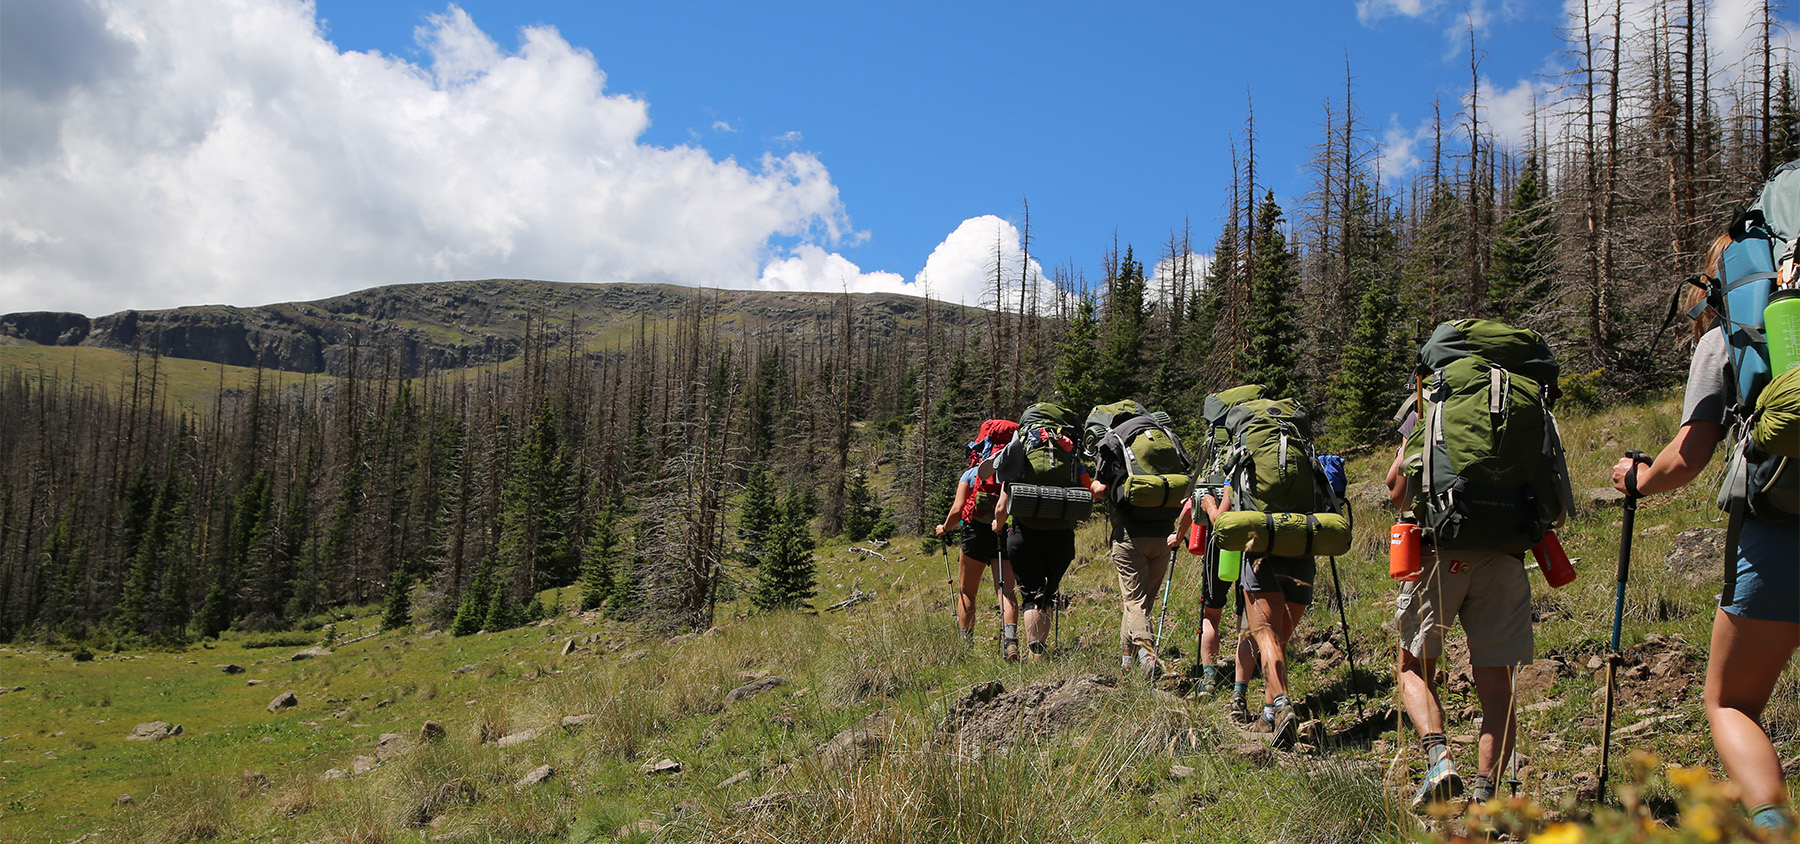 Backpackers travel the Continental Divide Trail in Colorado